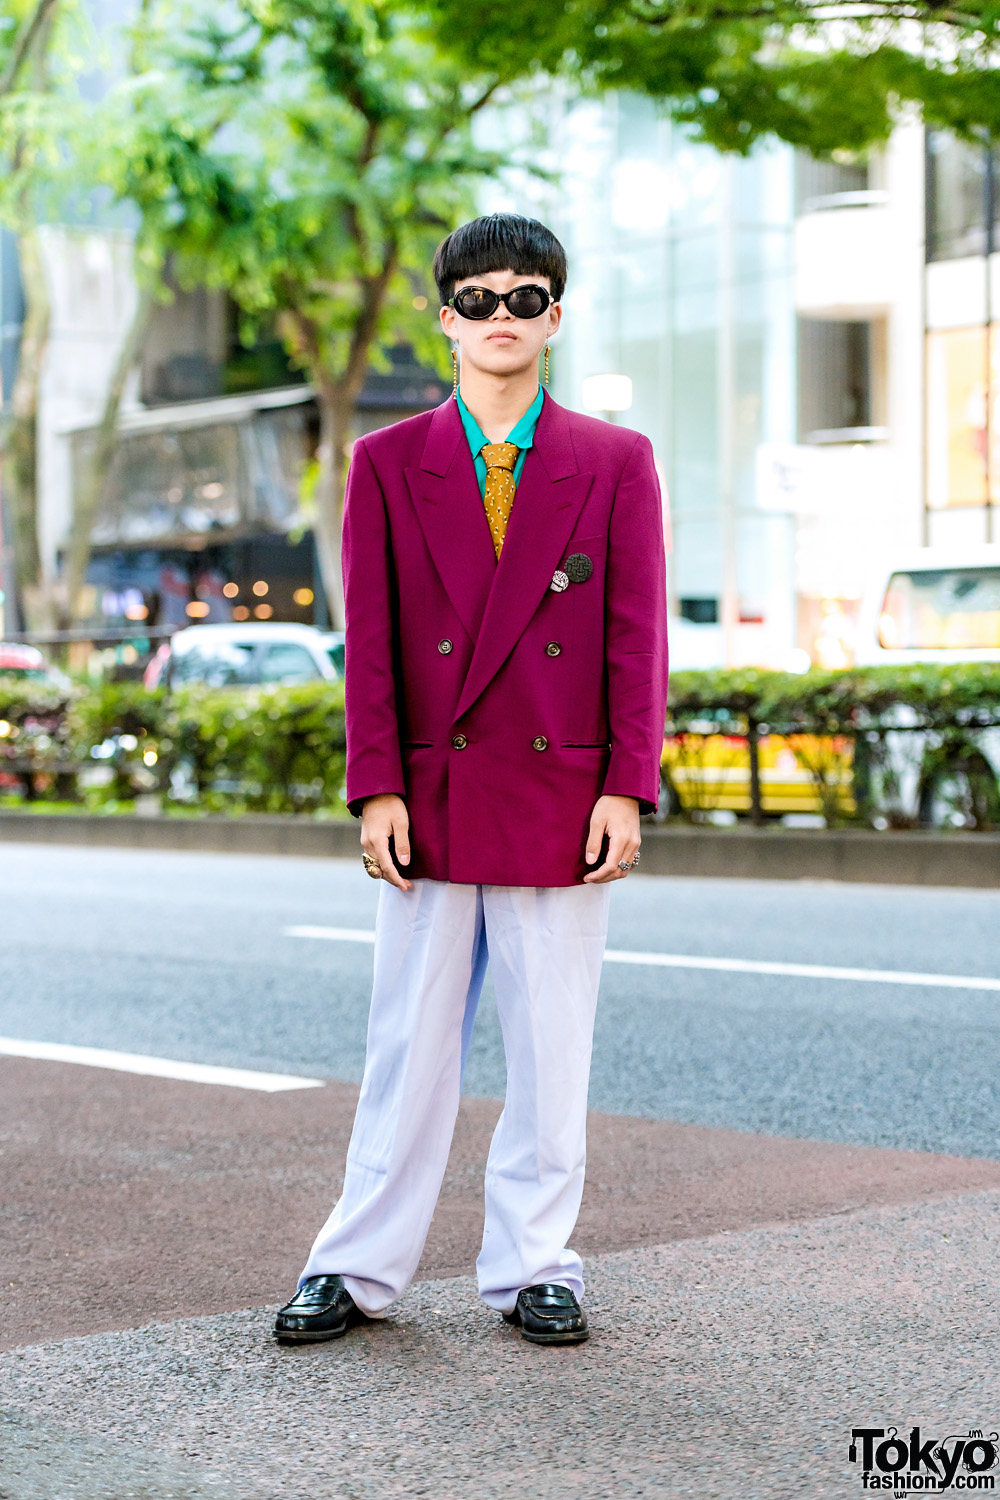 Christopher Nemeth & Or Glory w/ Glasses, Hat & Loafers in Harajuku 